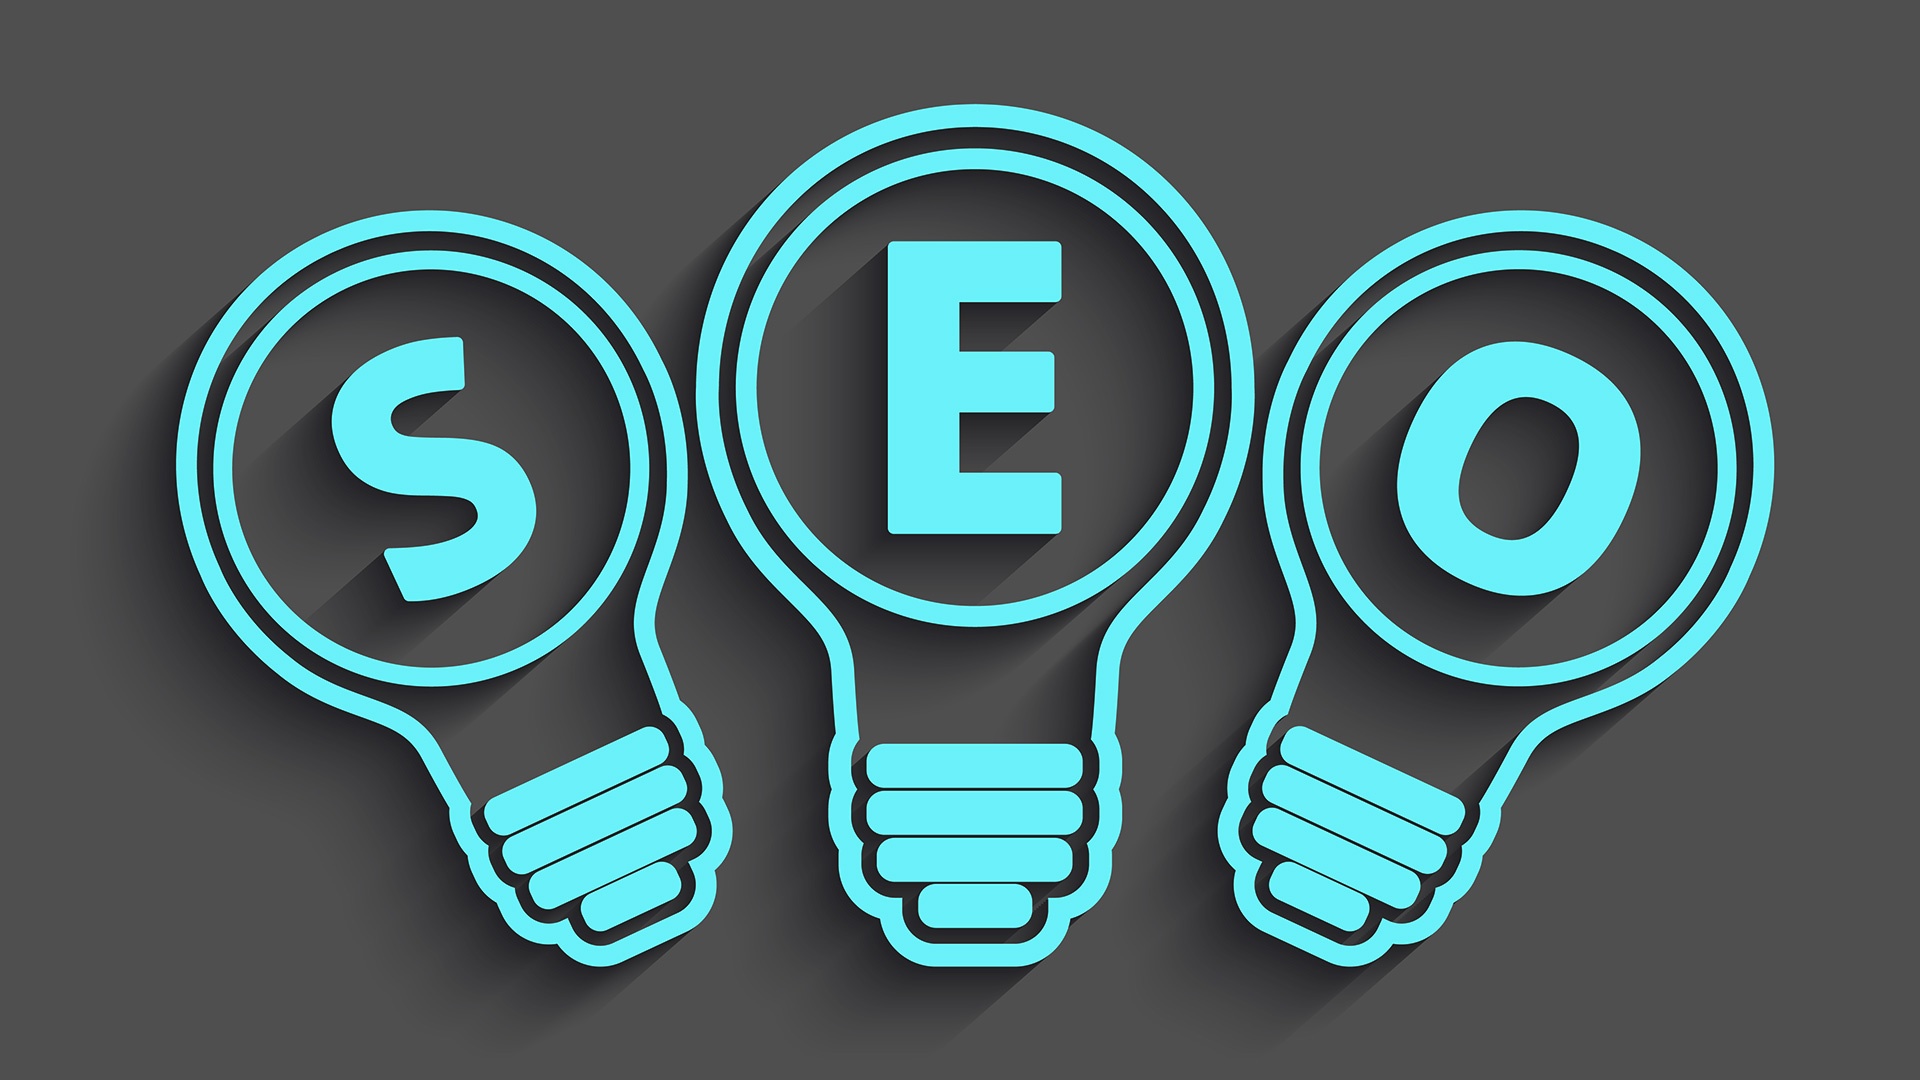 What to expect from your SEO provider